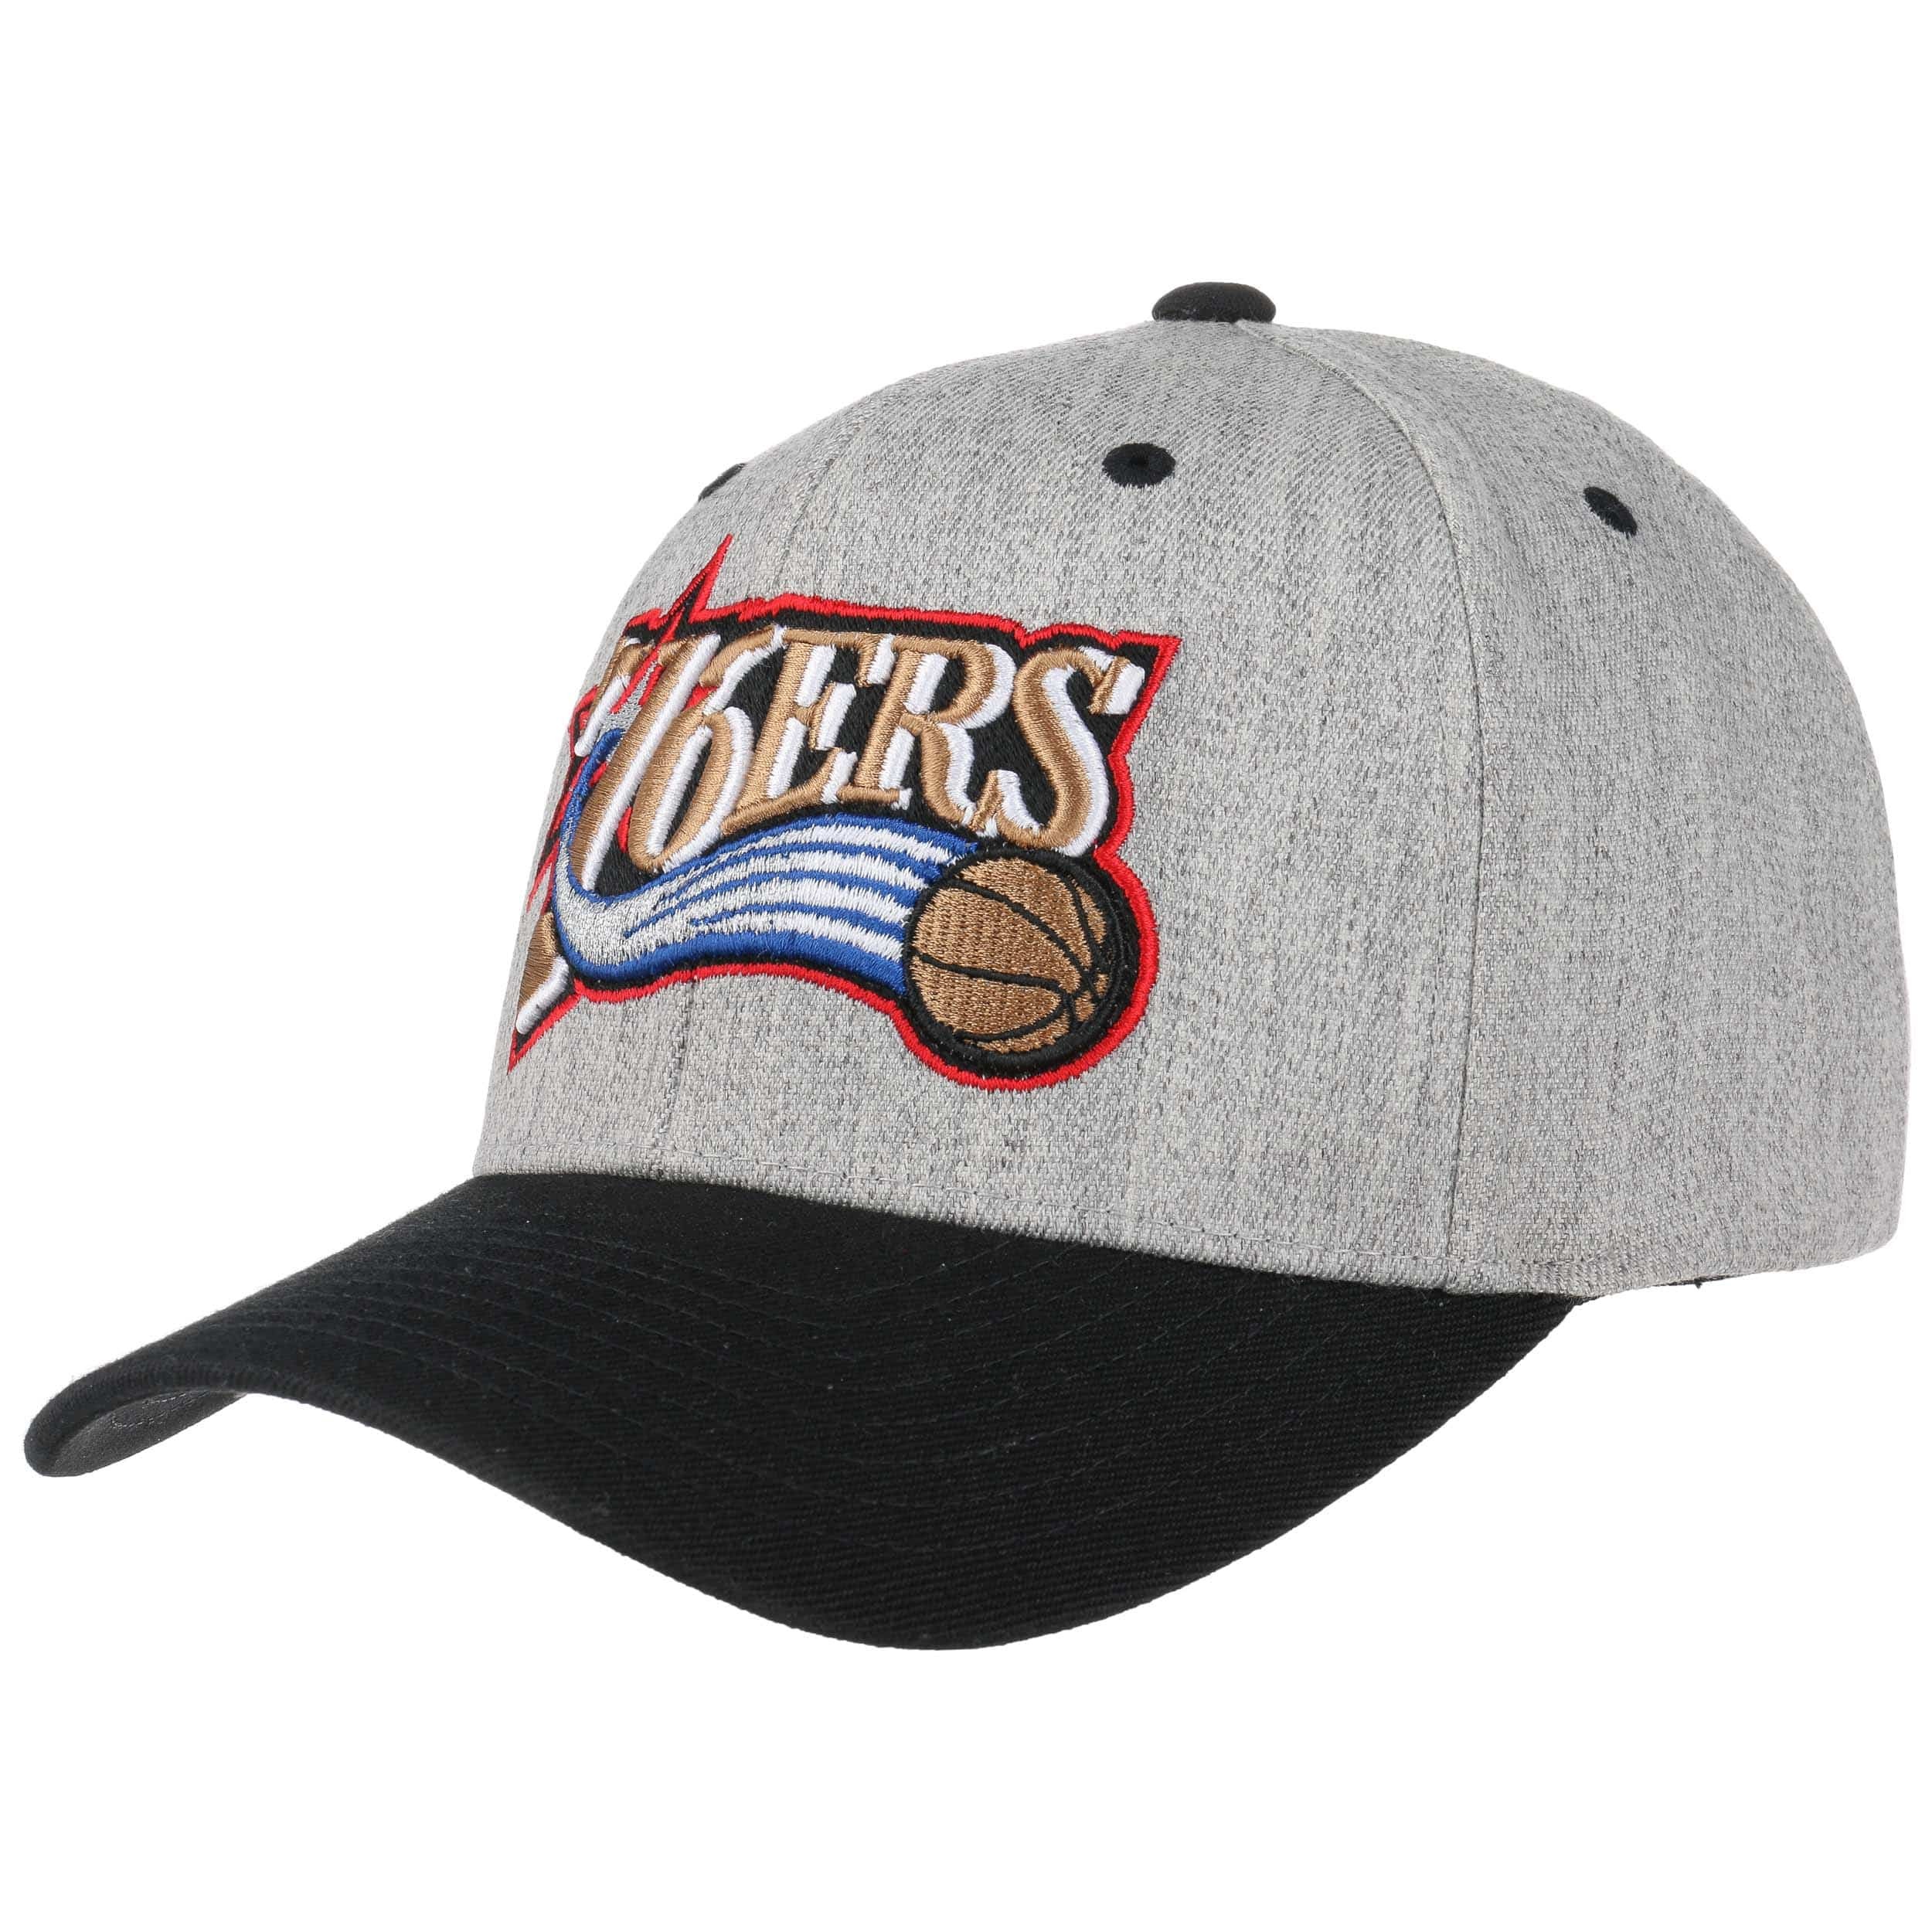 Twotone 110 76ers Cap by Mitchell & Ness - 32,95